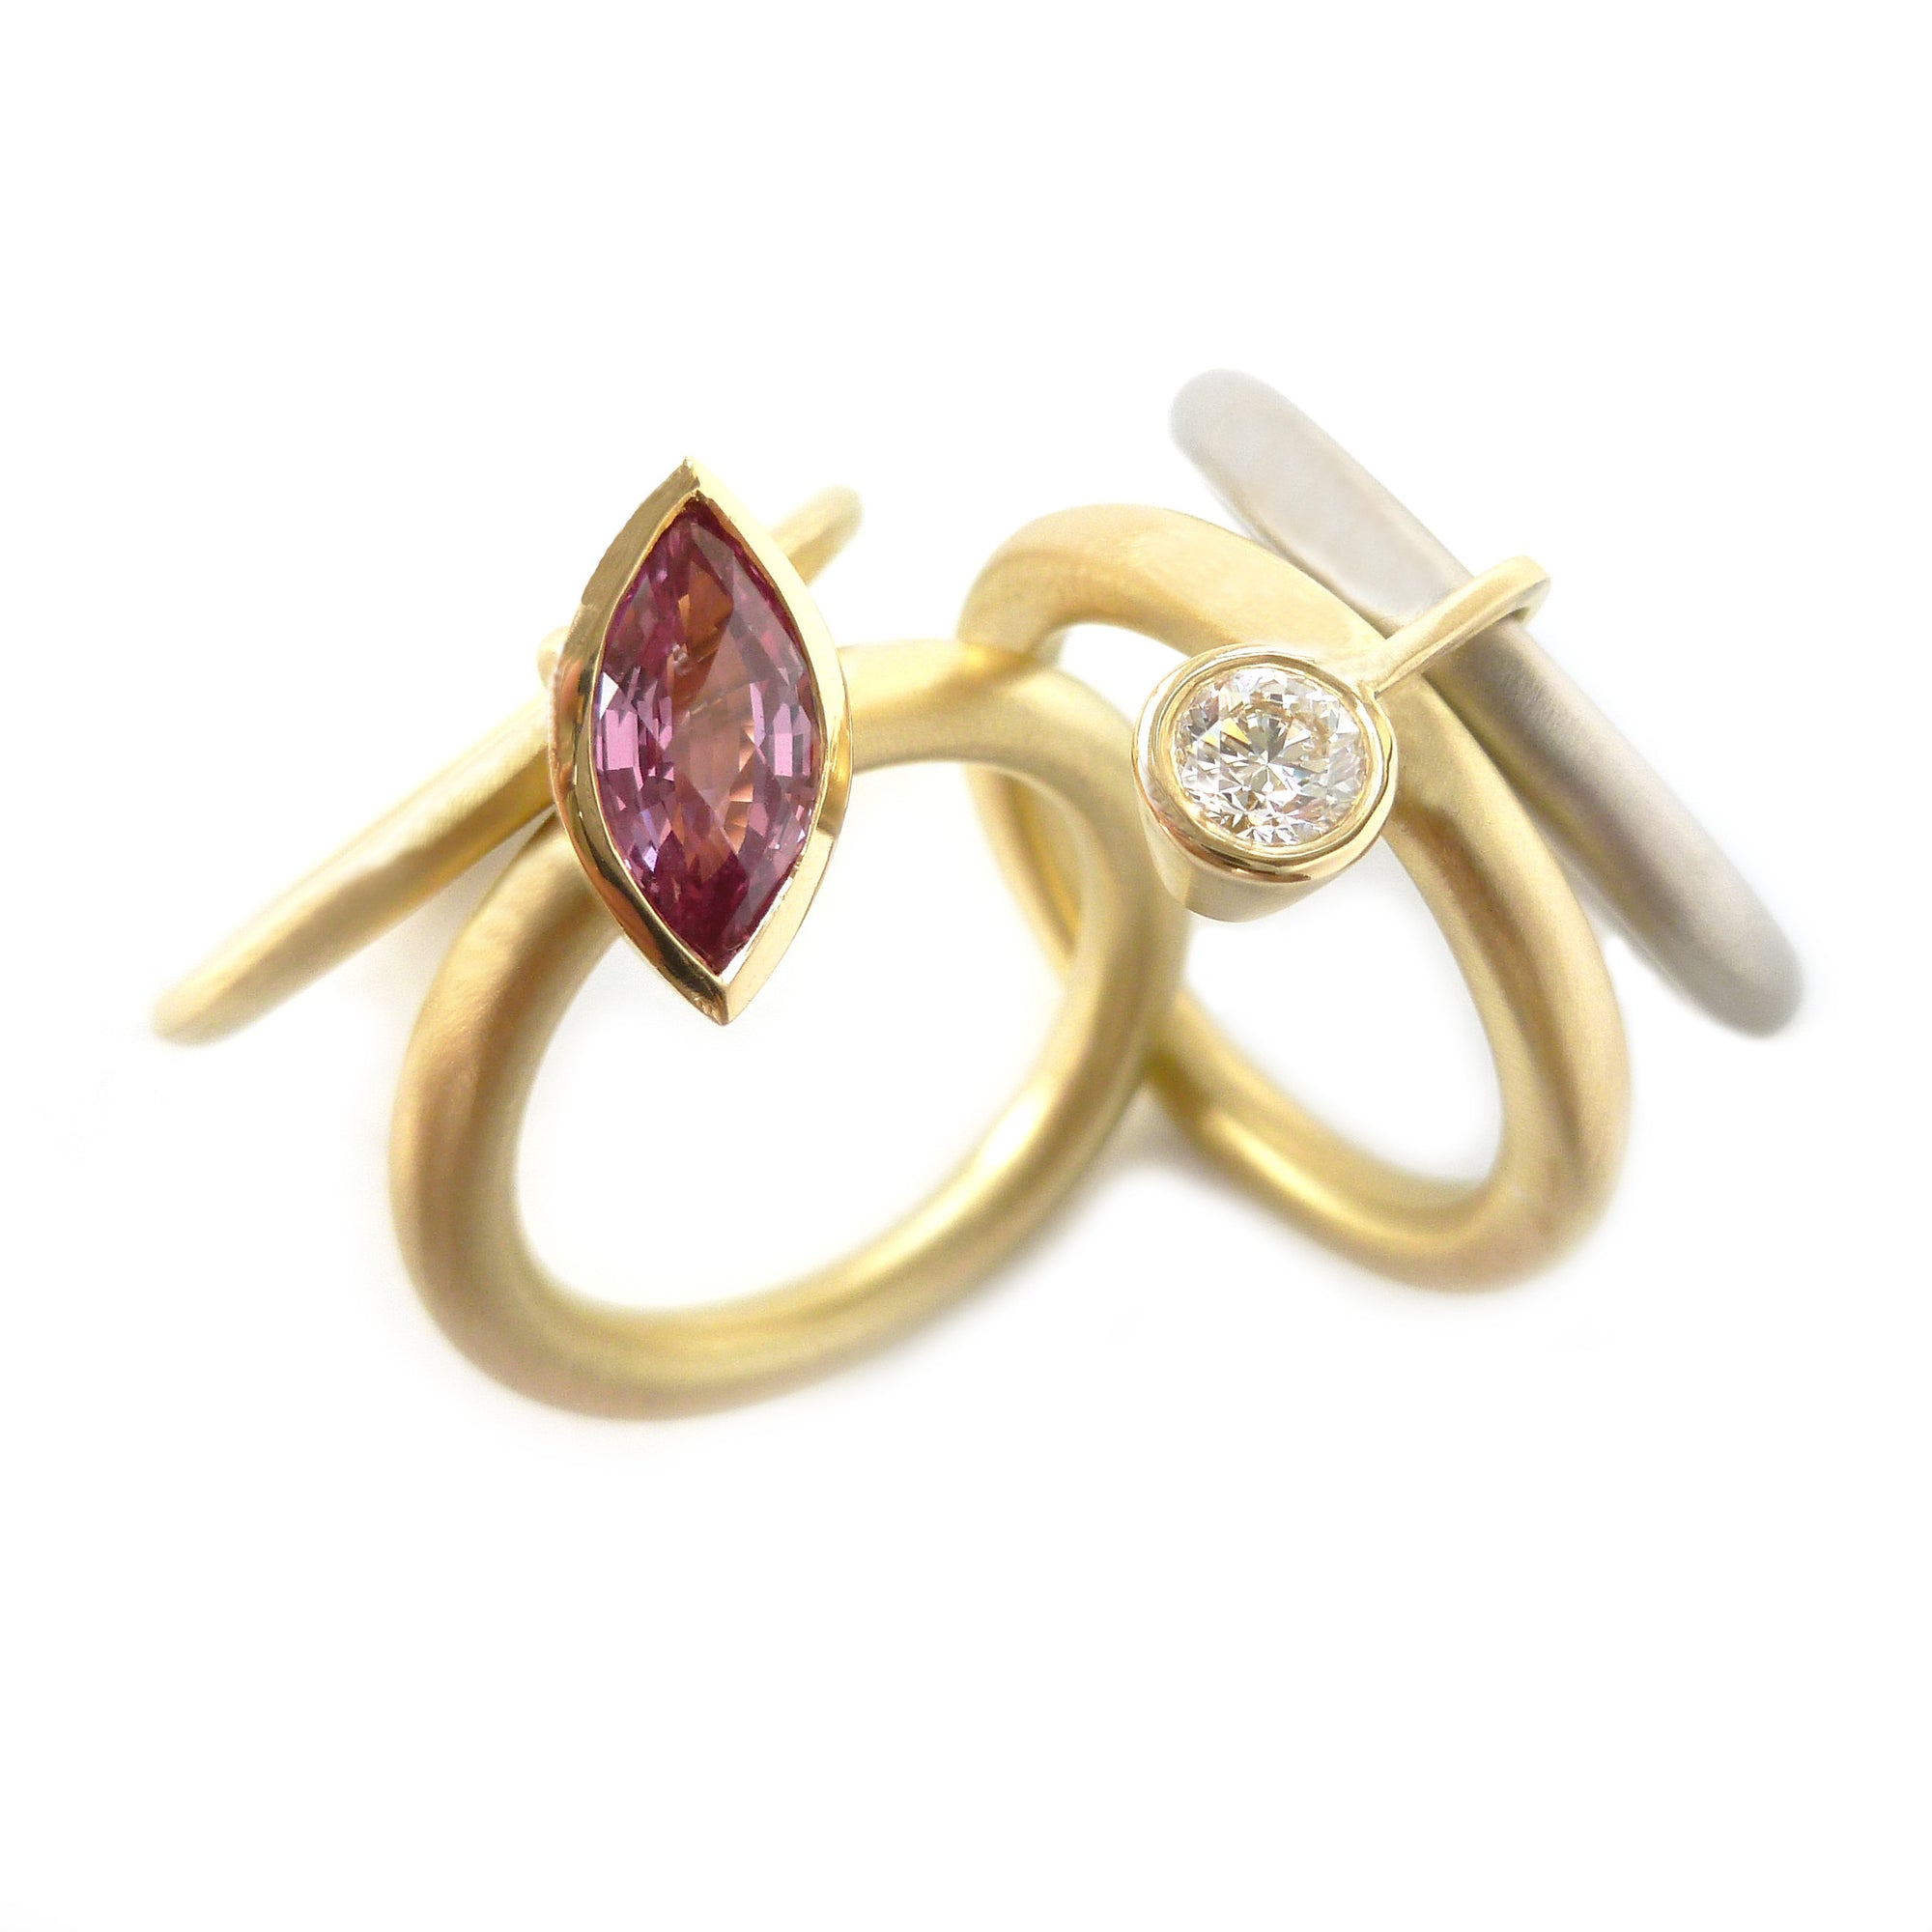 Unusual, unique, bespoke and modern statement gold and marquise pink sapphire stacking ring set handmade by designer maker Sue Lane contemporary Jewellery, UK